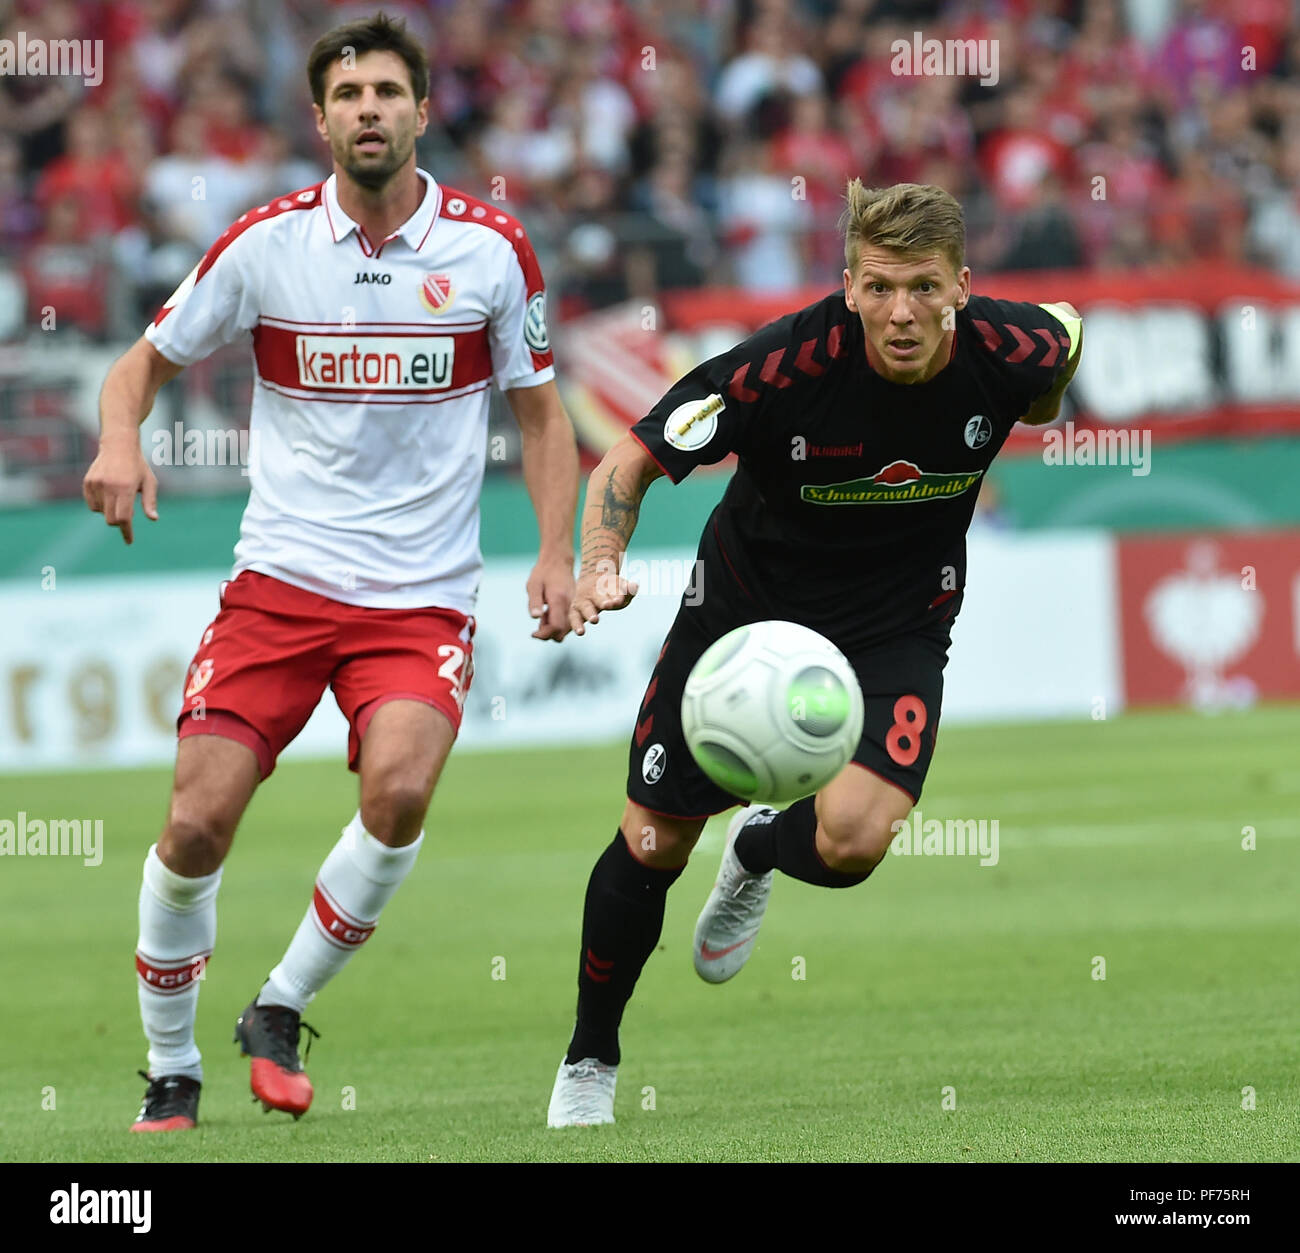 Cottbus, Germany. 20th August 2018. Soccer, DFB Cup, Energie Cottbus vs SC Freiburg, 1st round in the Stadion der Freundschaft: Mike Frantz (r) from Freiburg wins against Tim Kruse from Cottbus. Photo: Bernd Settnik/dpa-Znteralbild/dpa Credit: dpa picture alliance/Alamy Live News Credit: dpa picture alliance/Alamy Live News Stock Photo